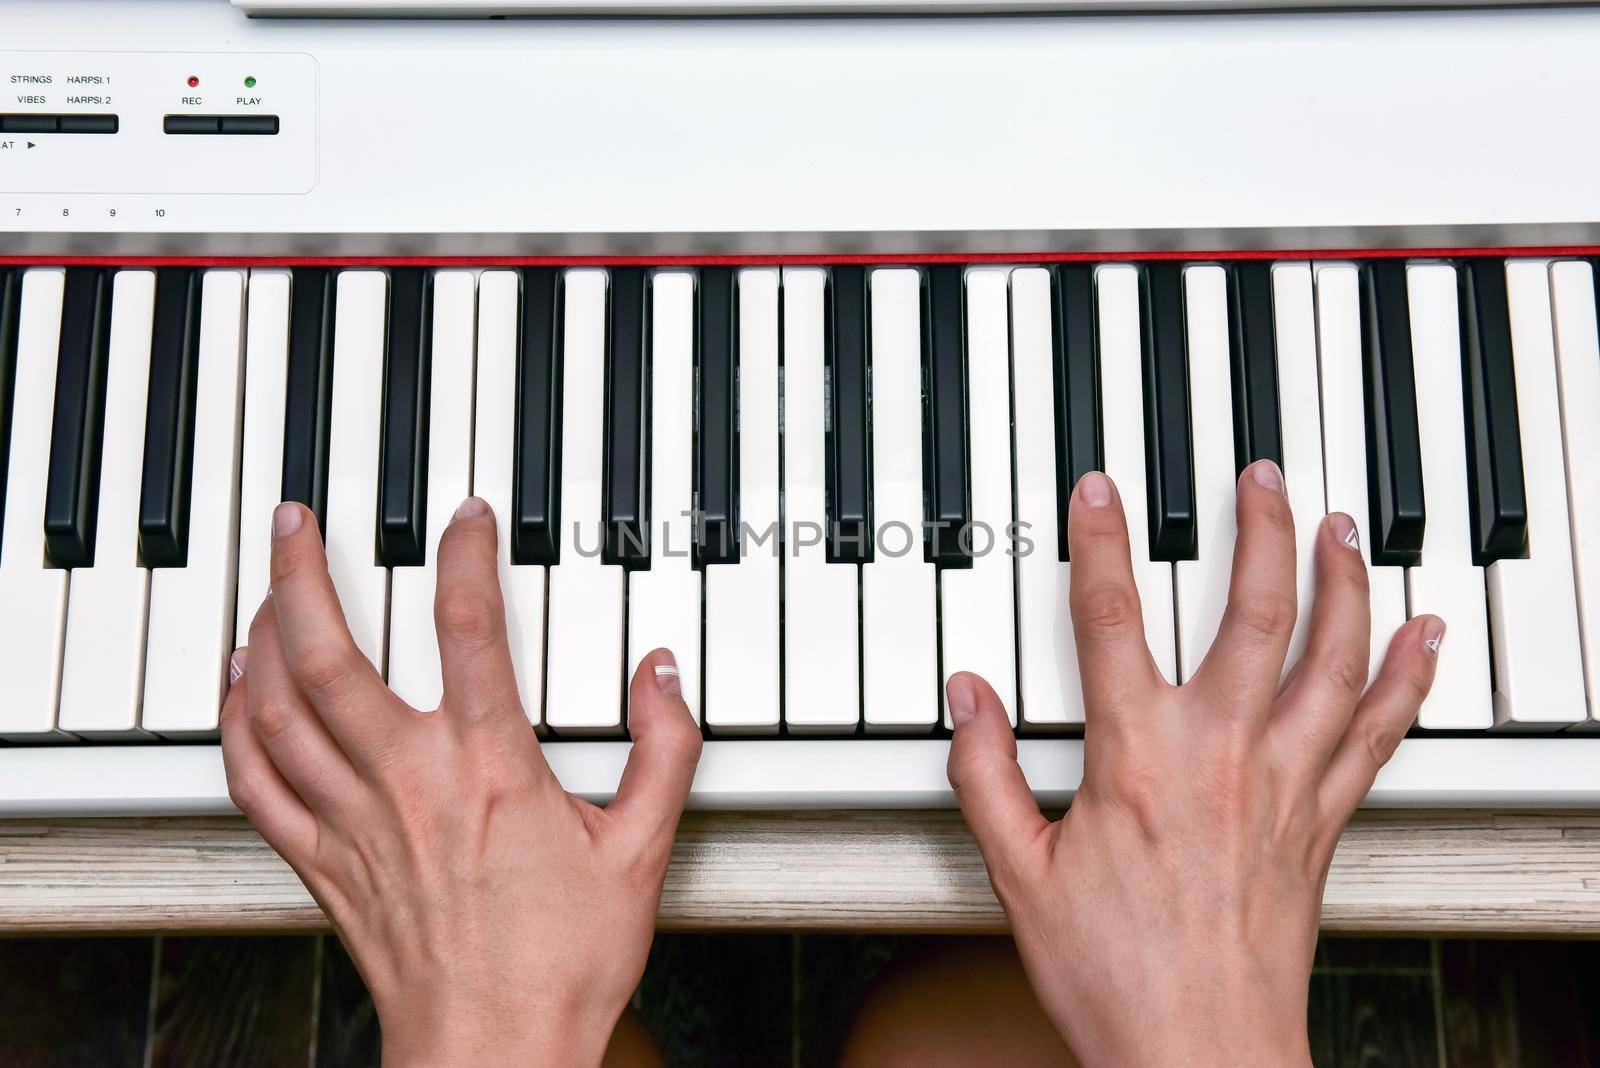 Woman's hands playing electronic digital piano at home. The woman is professional pianist arranging music using piano electronic keyboards. Musician practicing keyboard composing music.